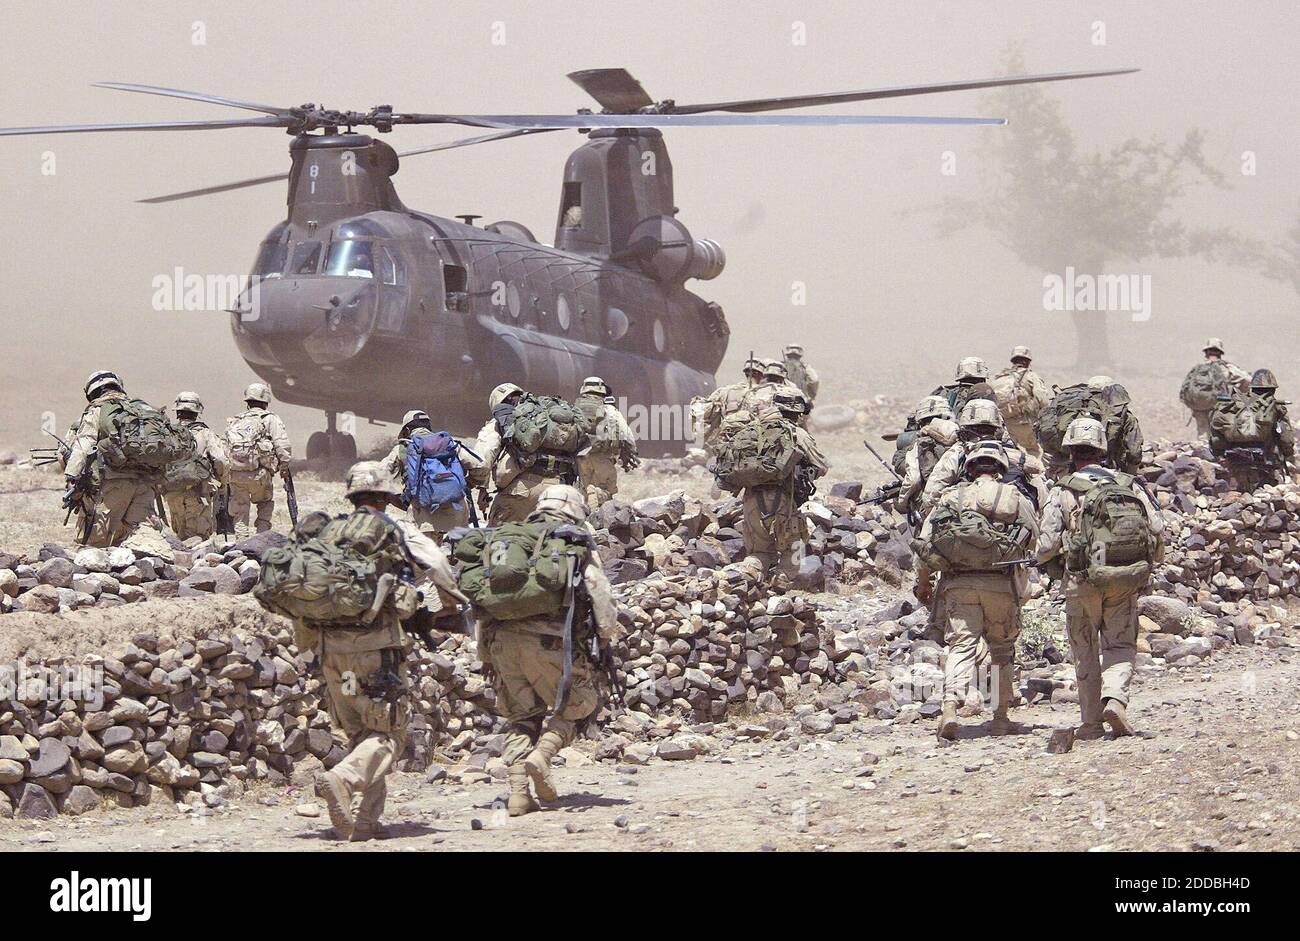 NO FILM, NO VIDEO, NO TV, NO DOCUMENTARY - Soldiers from Battle Company, 2nd Batt. Airborne, 503rd Infantry, 173rd Airborne Brigade rush to board a waiting Chinook helicopter while participating in Operation Como in the Deh Chopan District of Zabul Province, Afghanistan, on August 10, 2005. Photo by Tom Pennington/Fort Worth Star-Telegram/KRT/ABACAPRESS.COM. Stock Photo